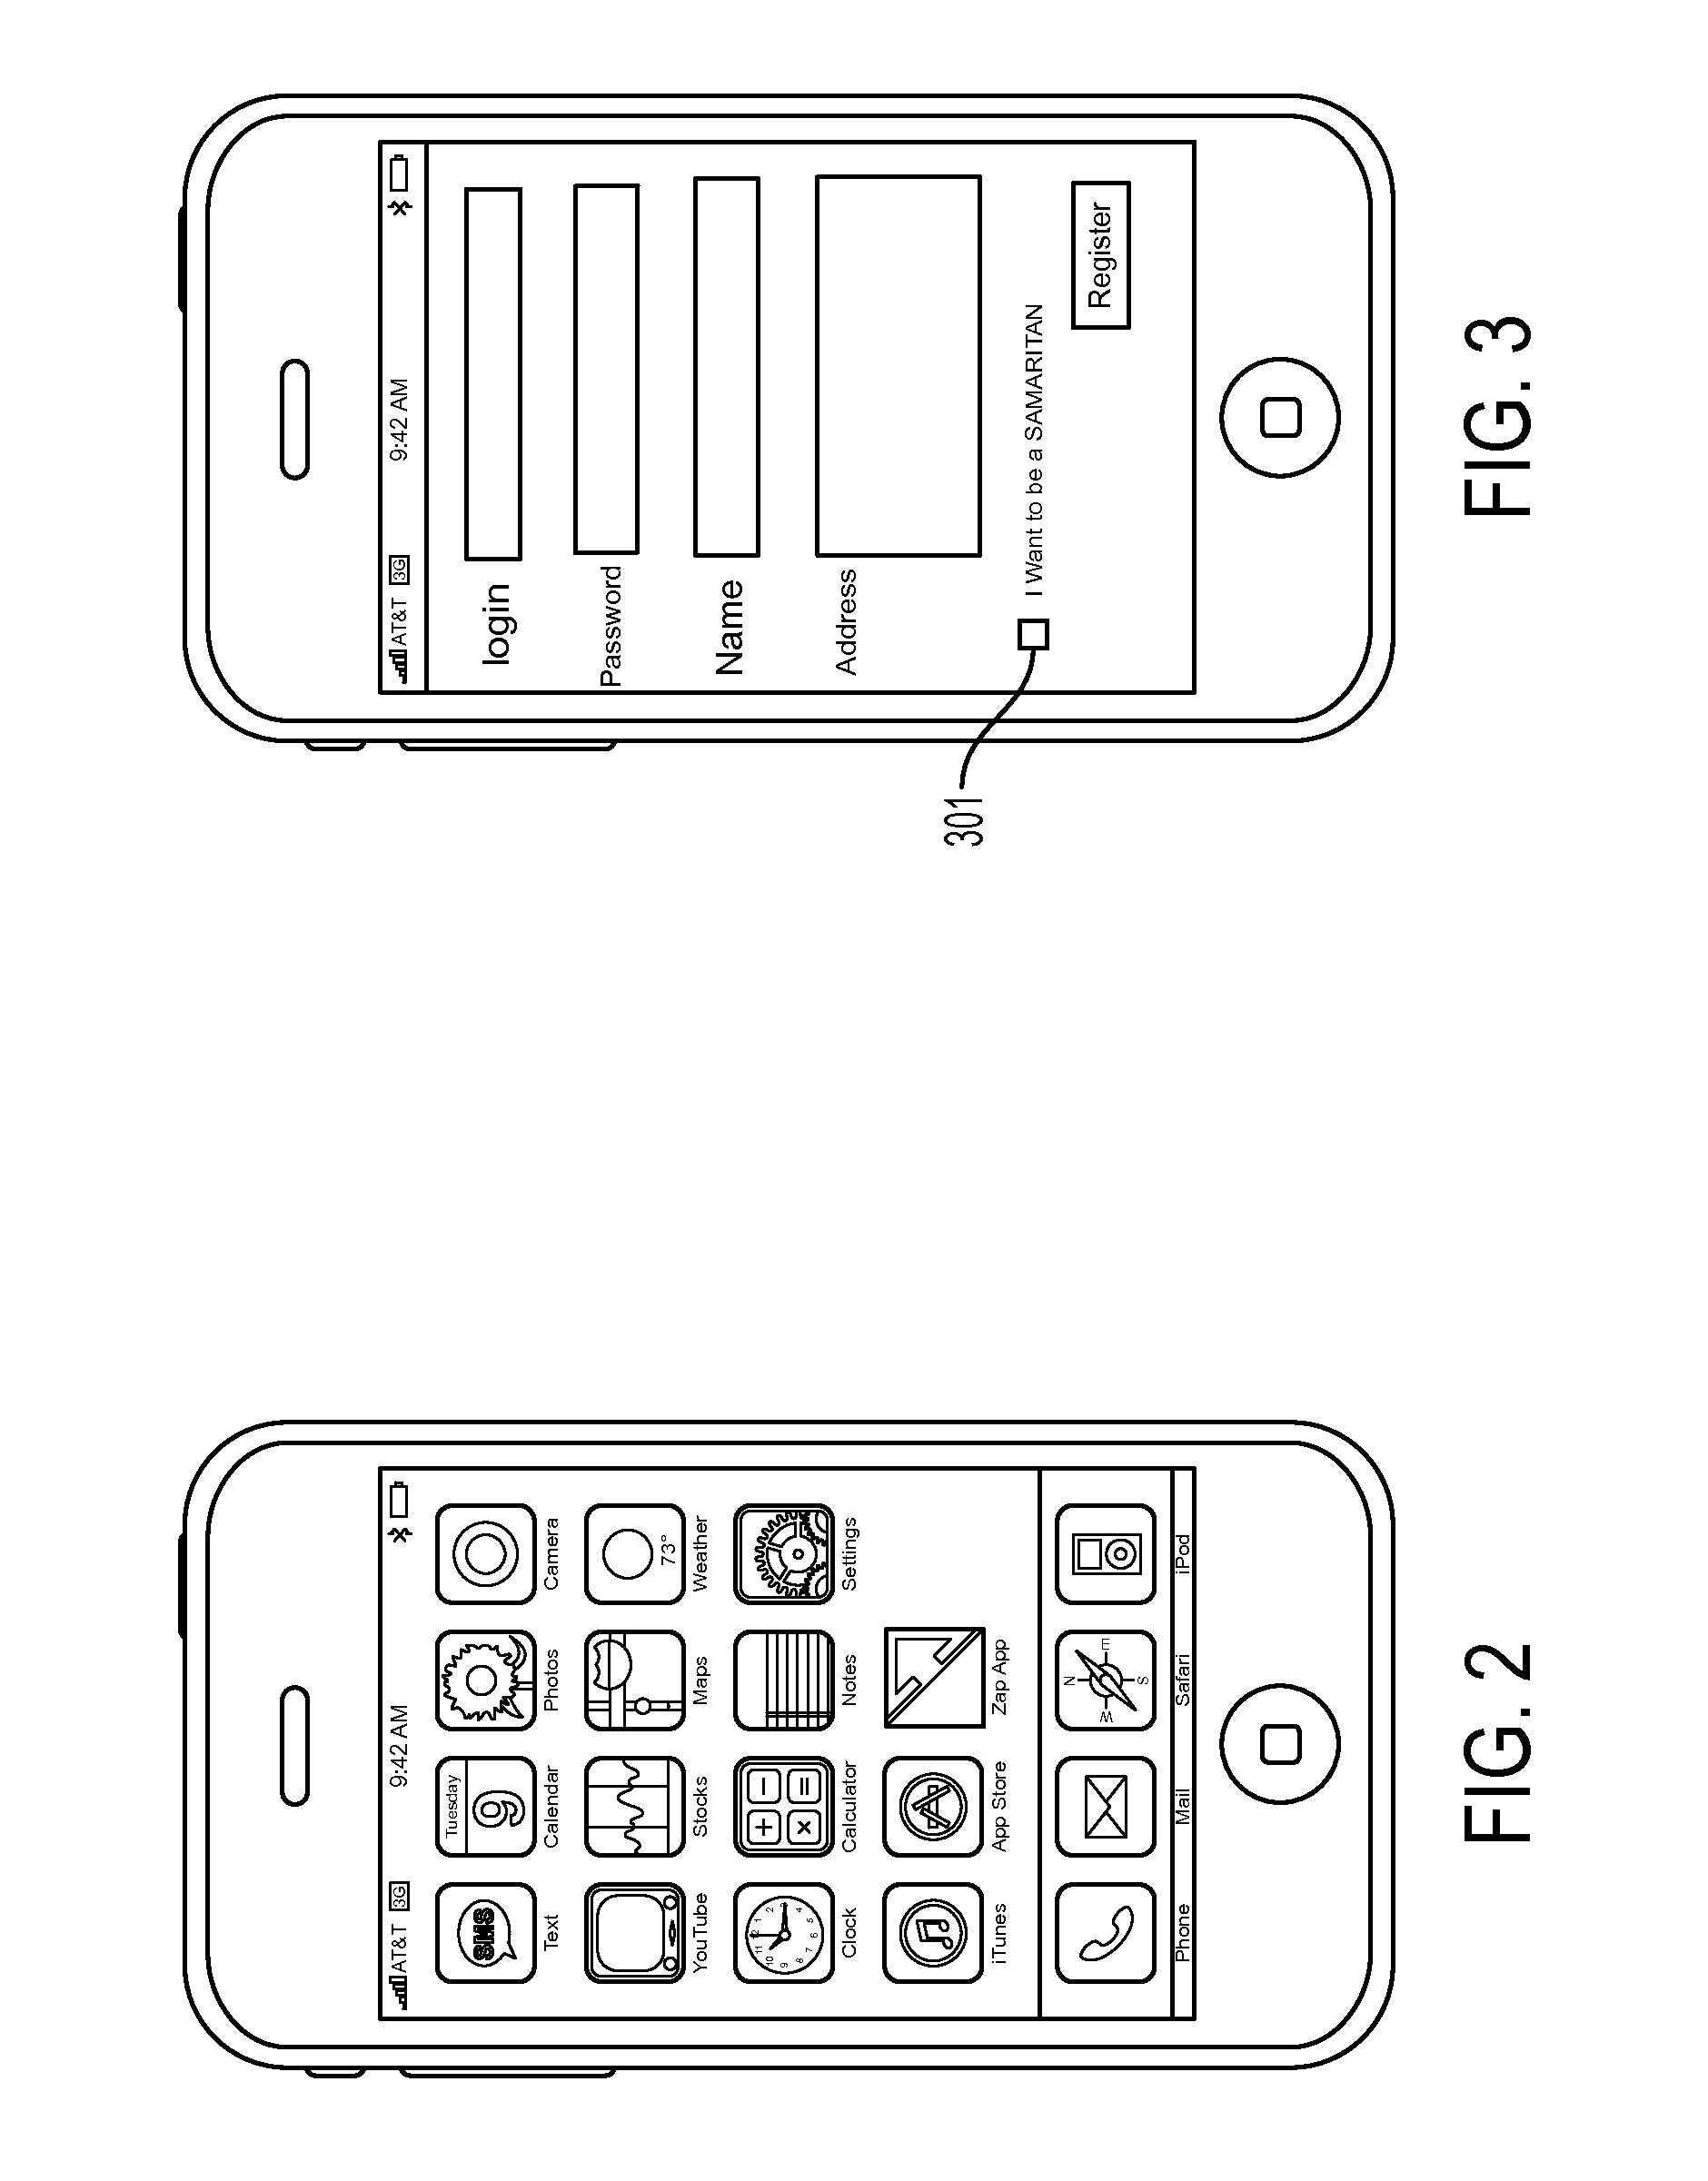 System and method for reporting and tracking incidents with a mobile device